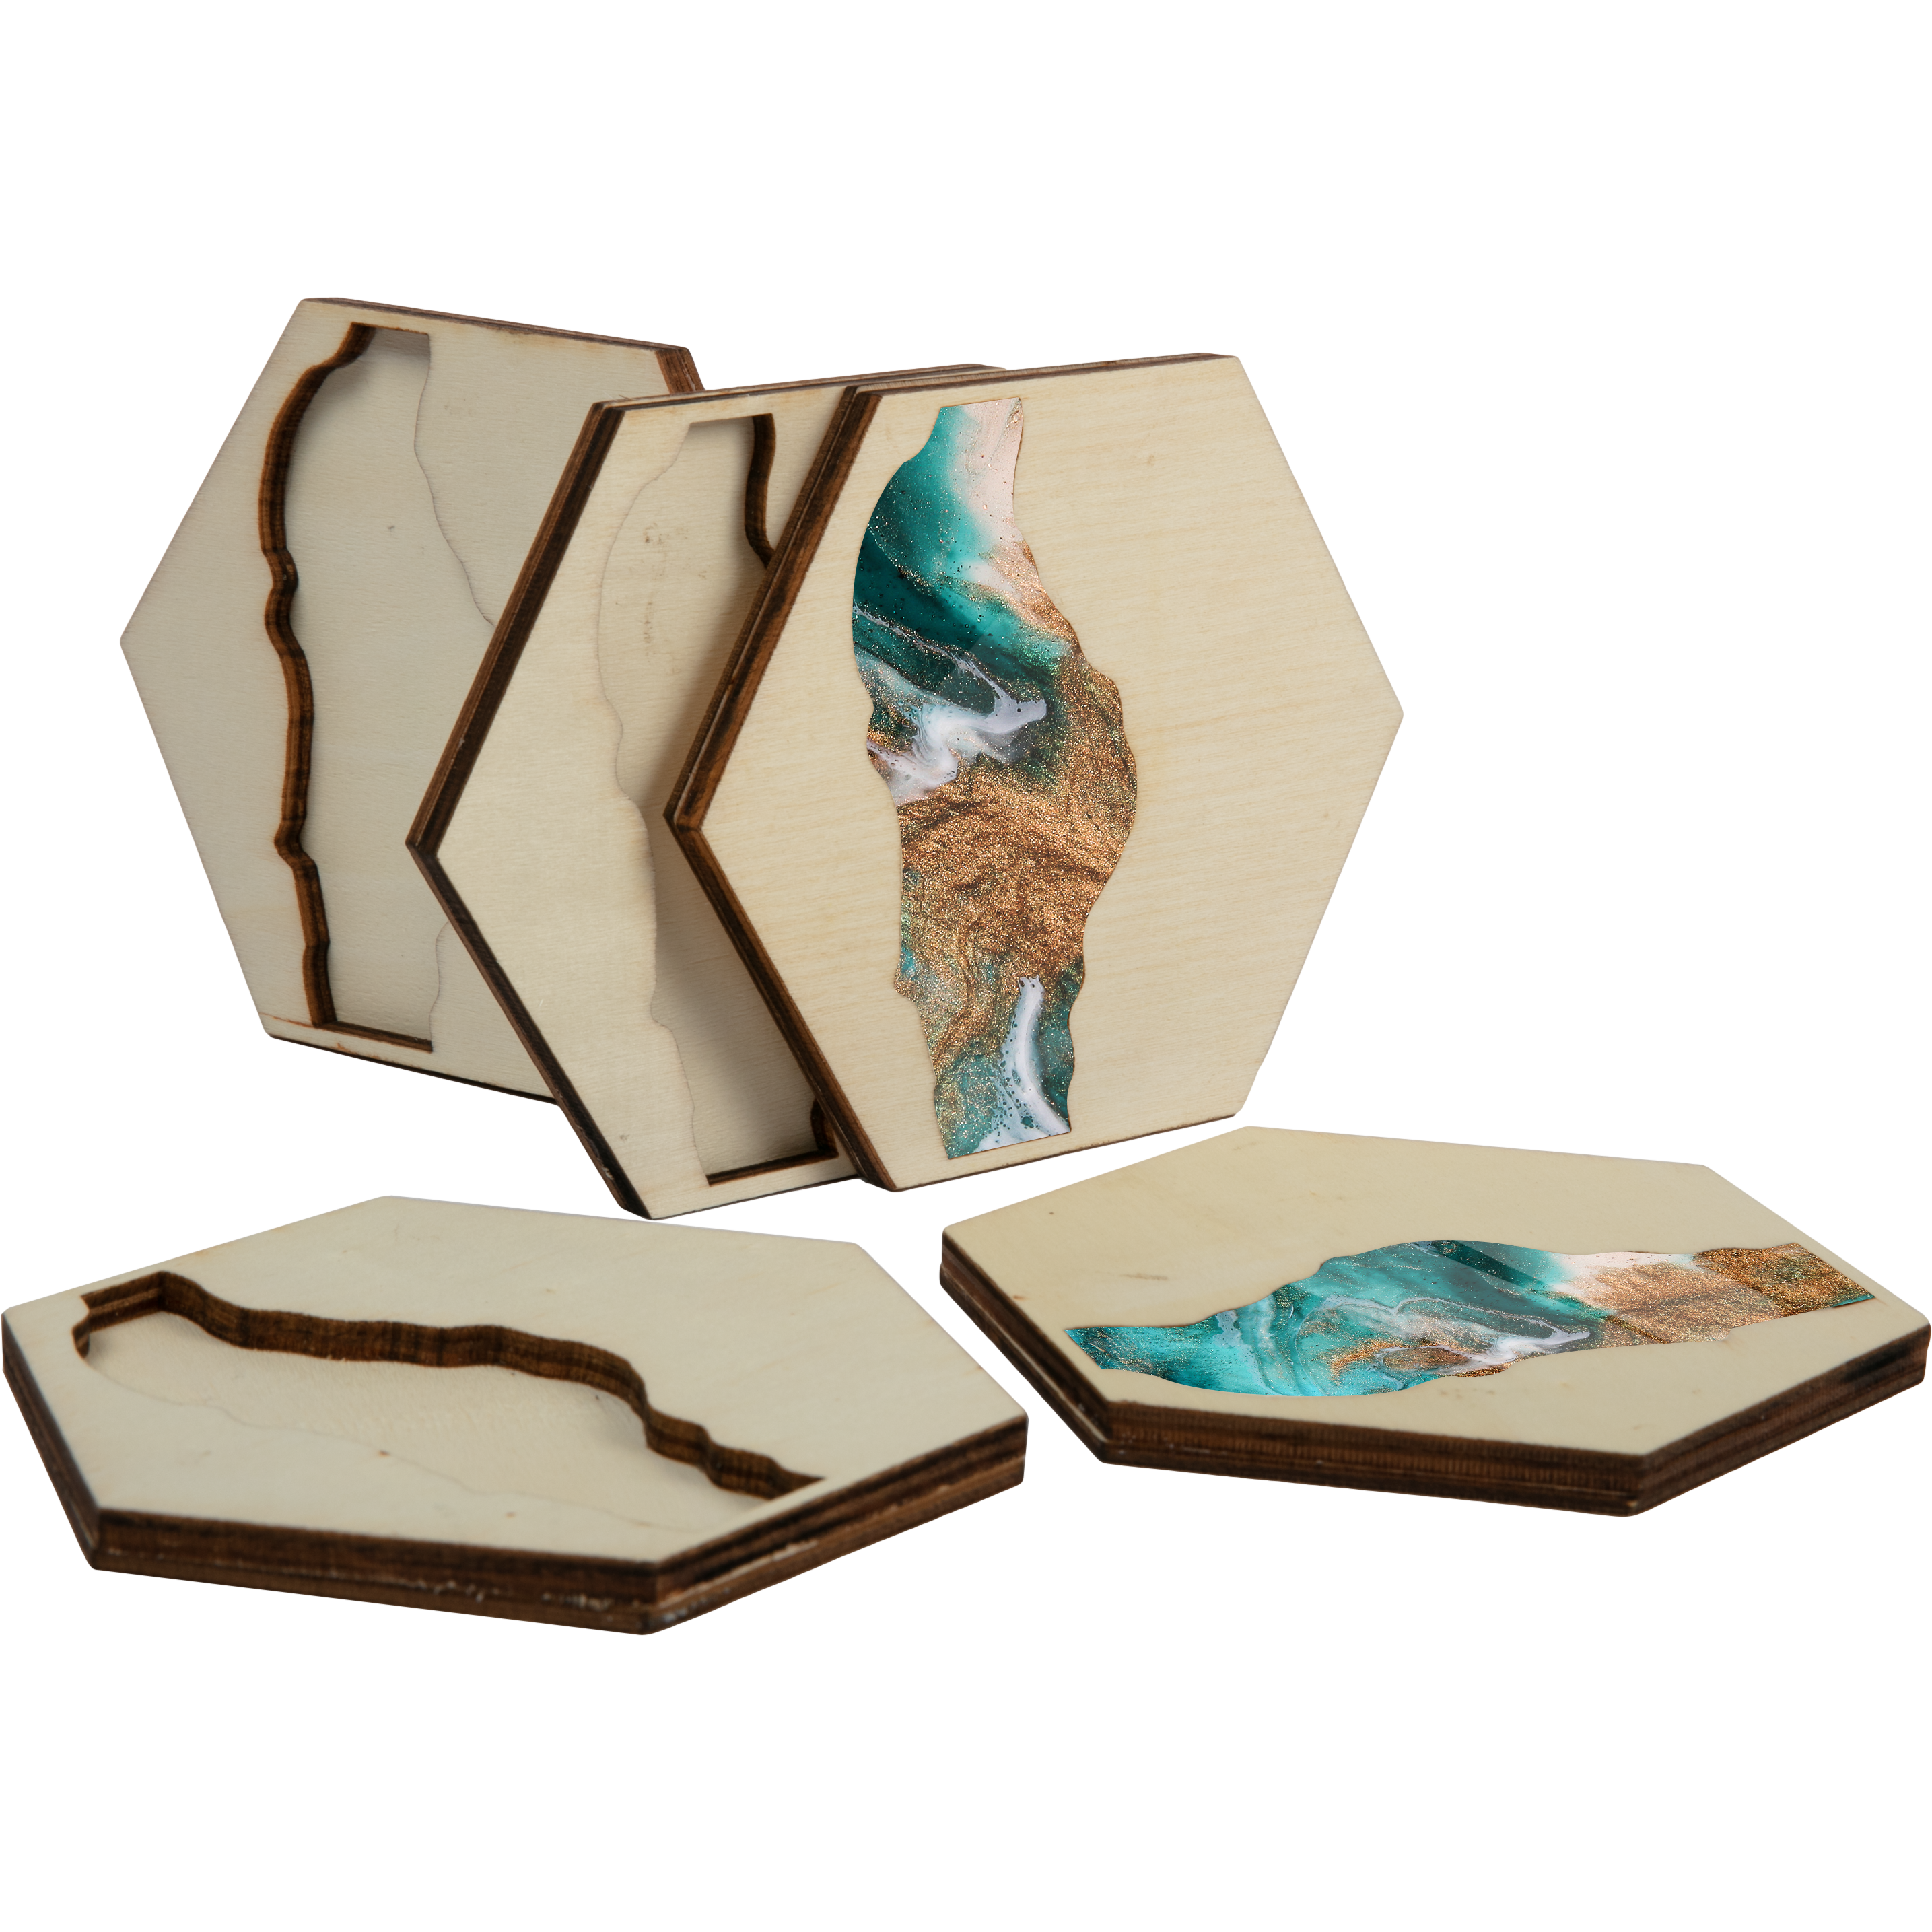 Image of Urban Crafter Plywood Hexaganol Coasters for Resin 5 pack 11.7 x 10 x 0.8cm